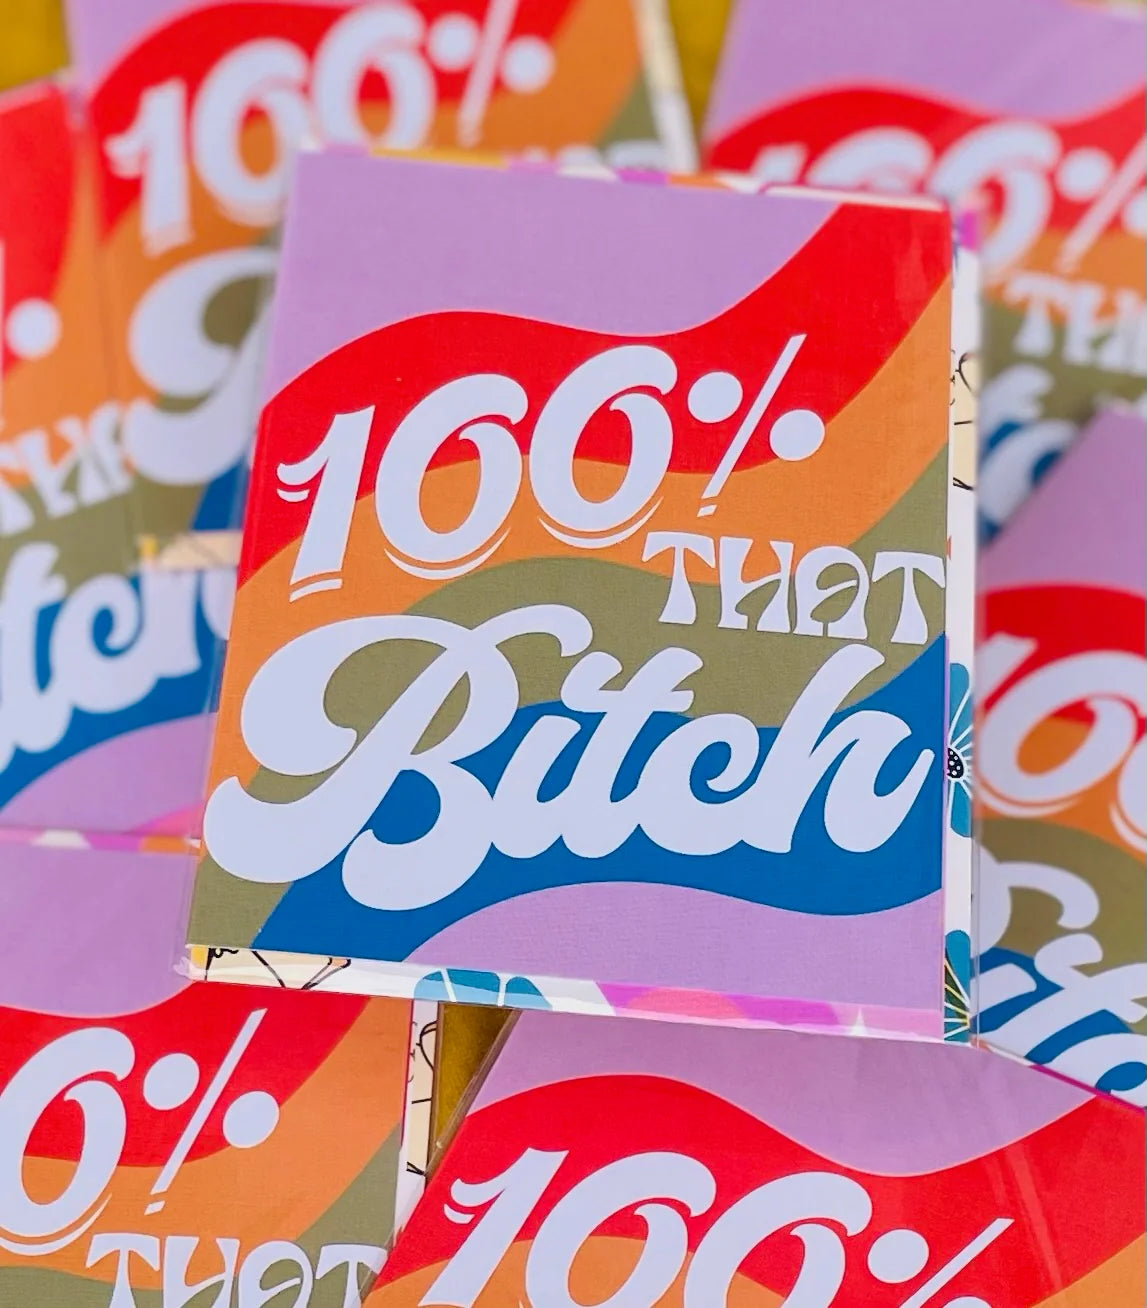 100 % That Bitch Lizzo Quote Greeting Card